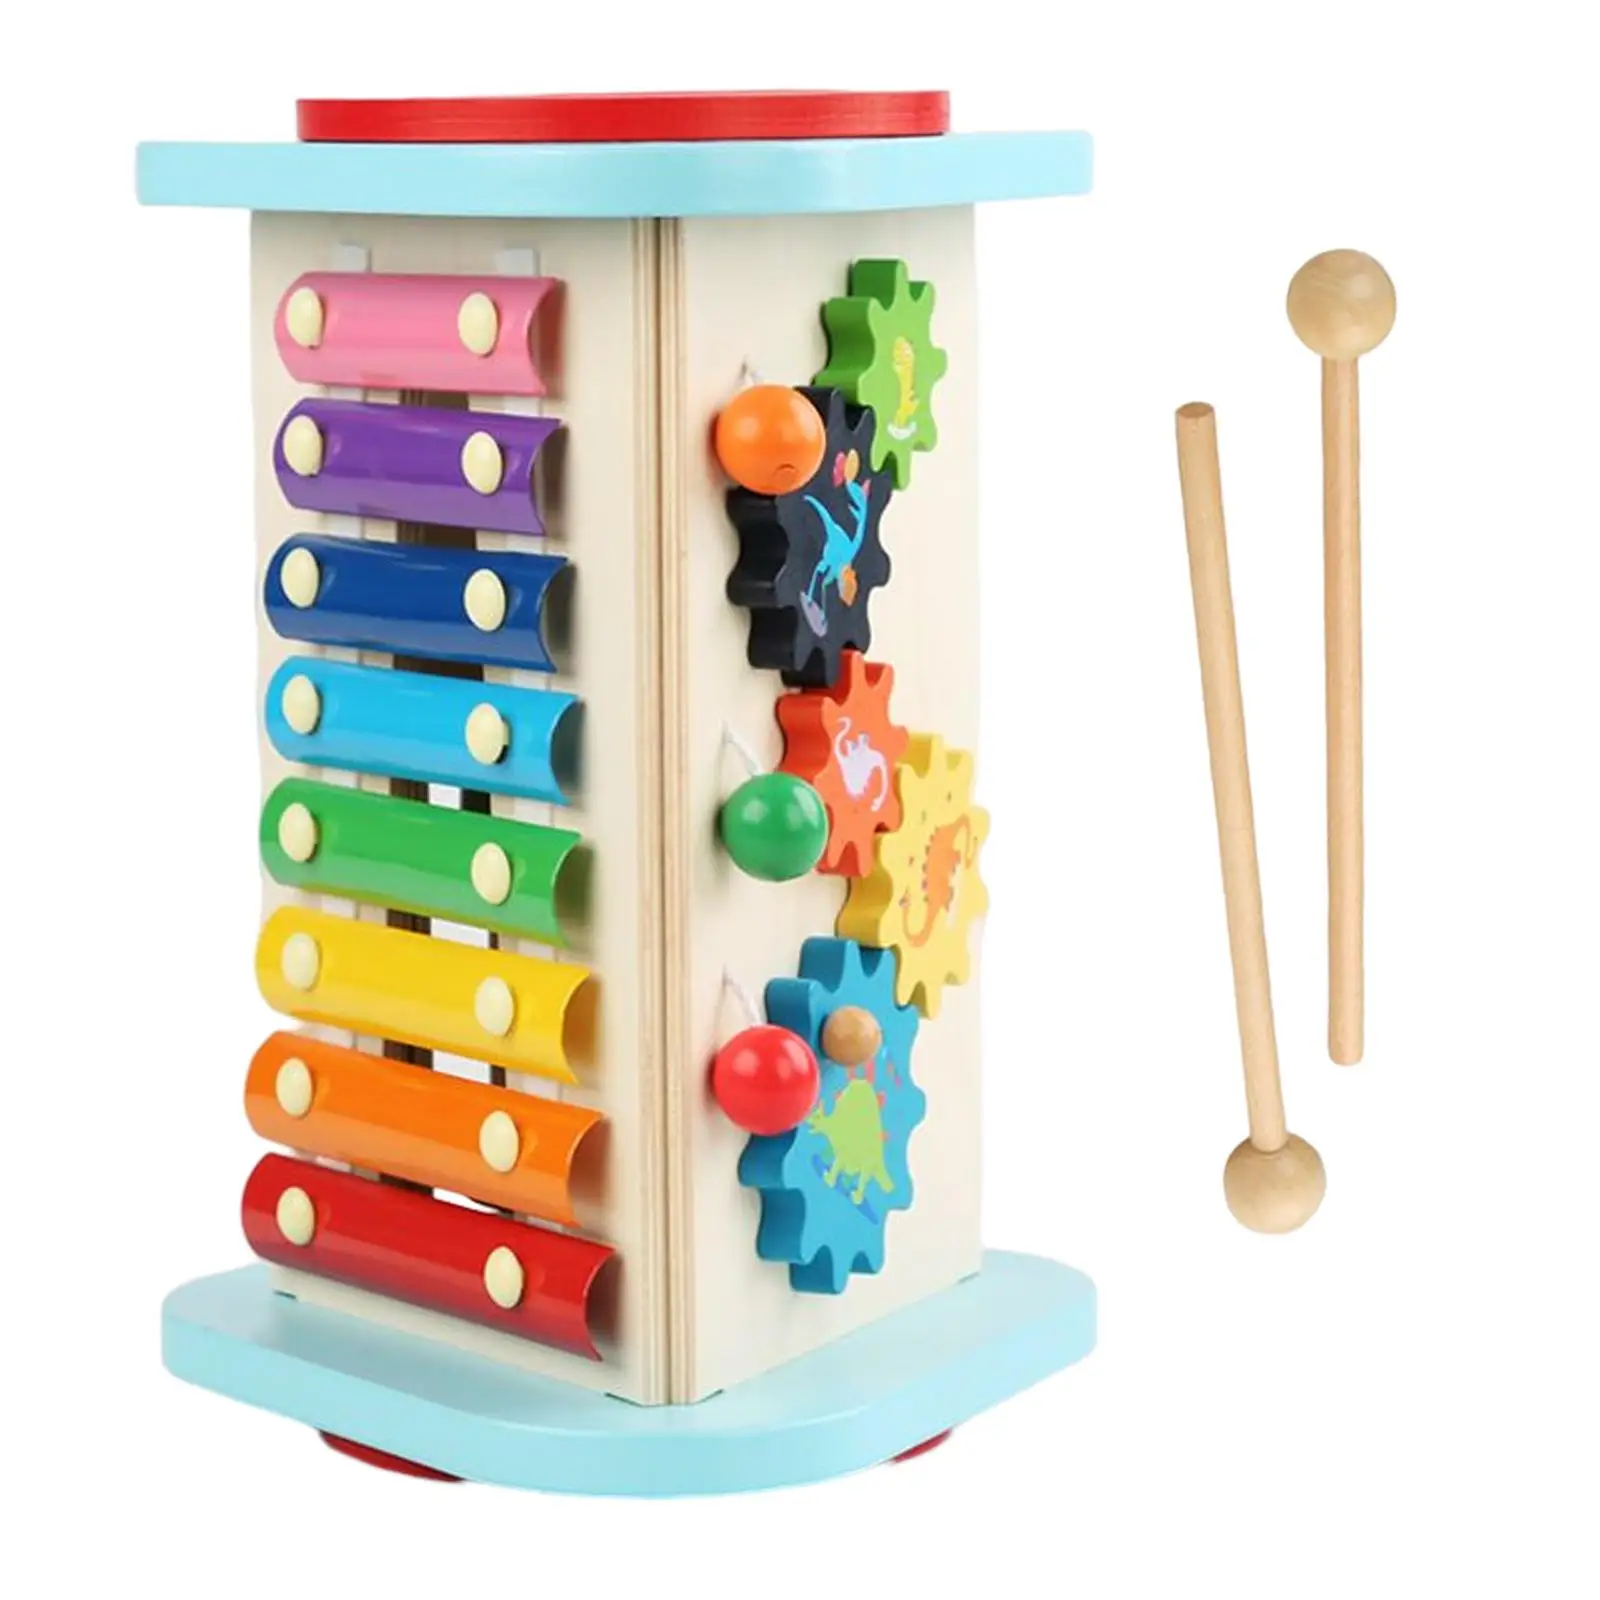 5 in 1 Kids Musical Instrument Toy Durable Colorful for Children Toddlers